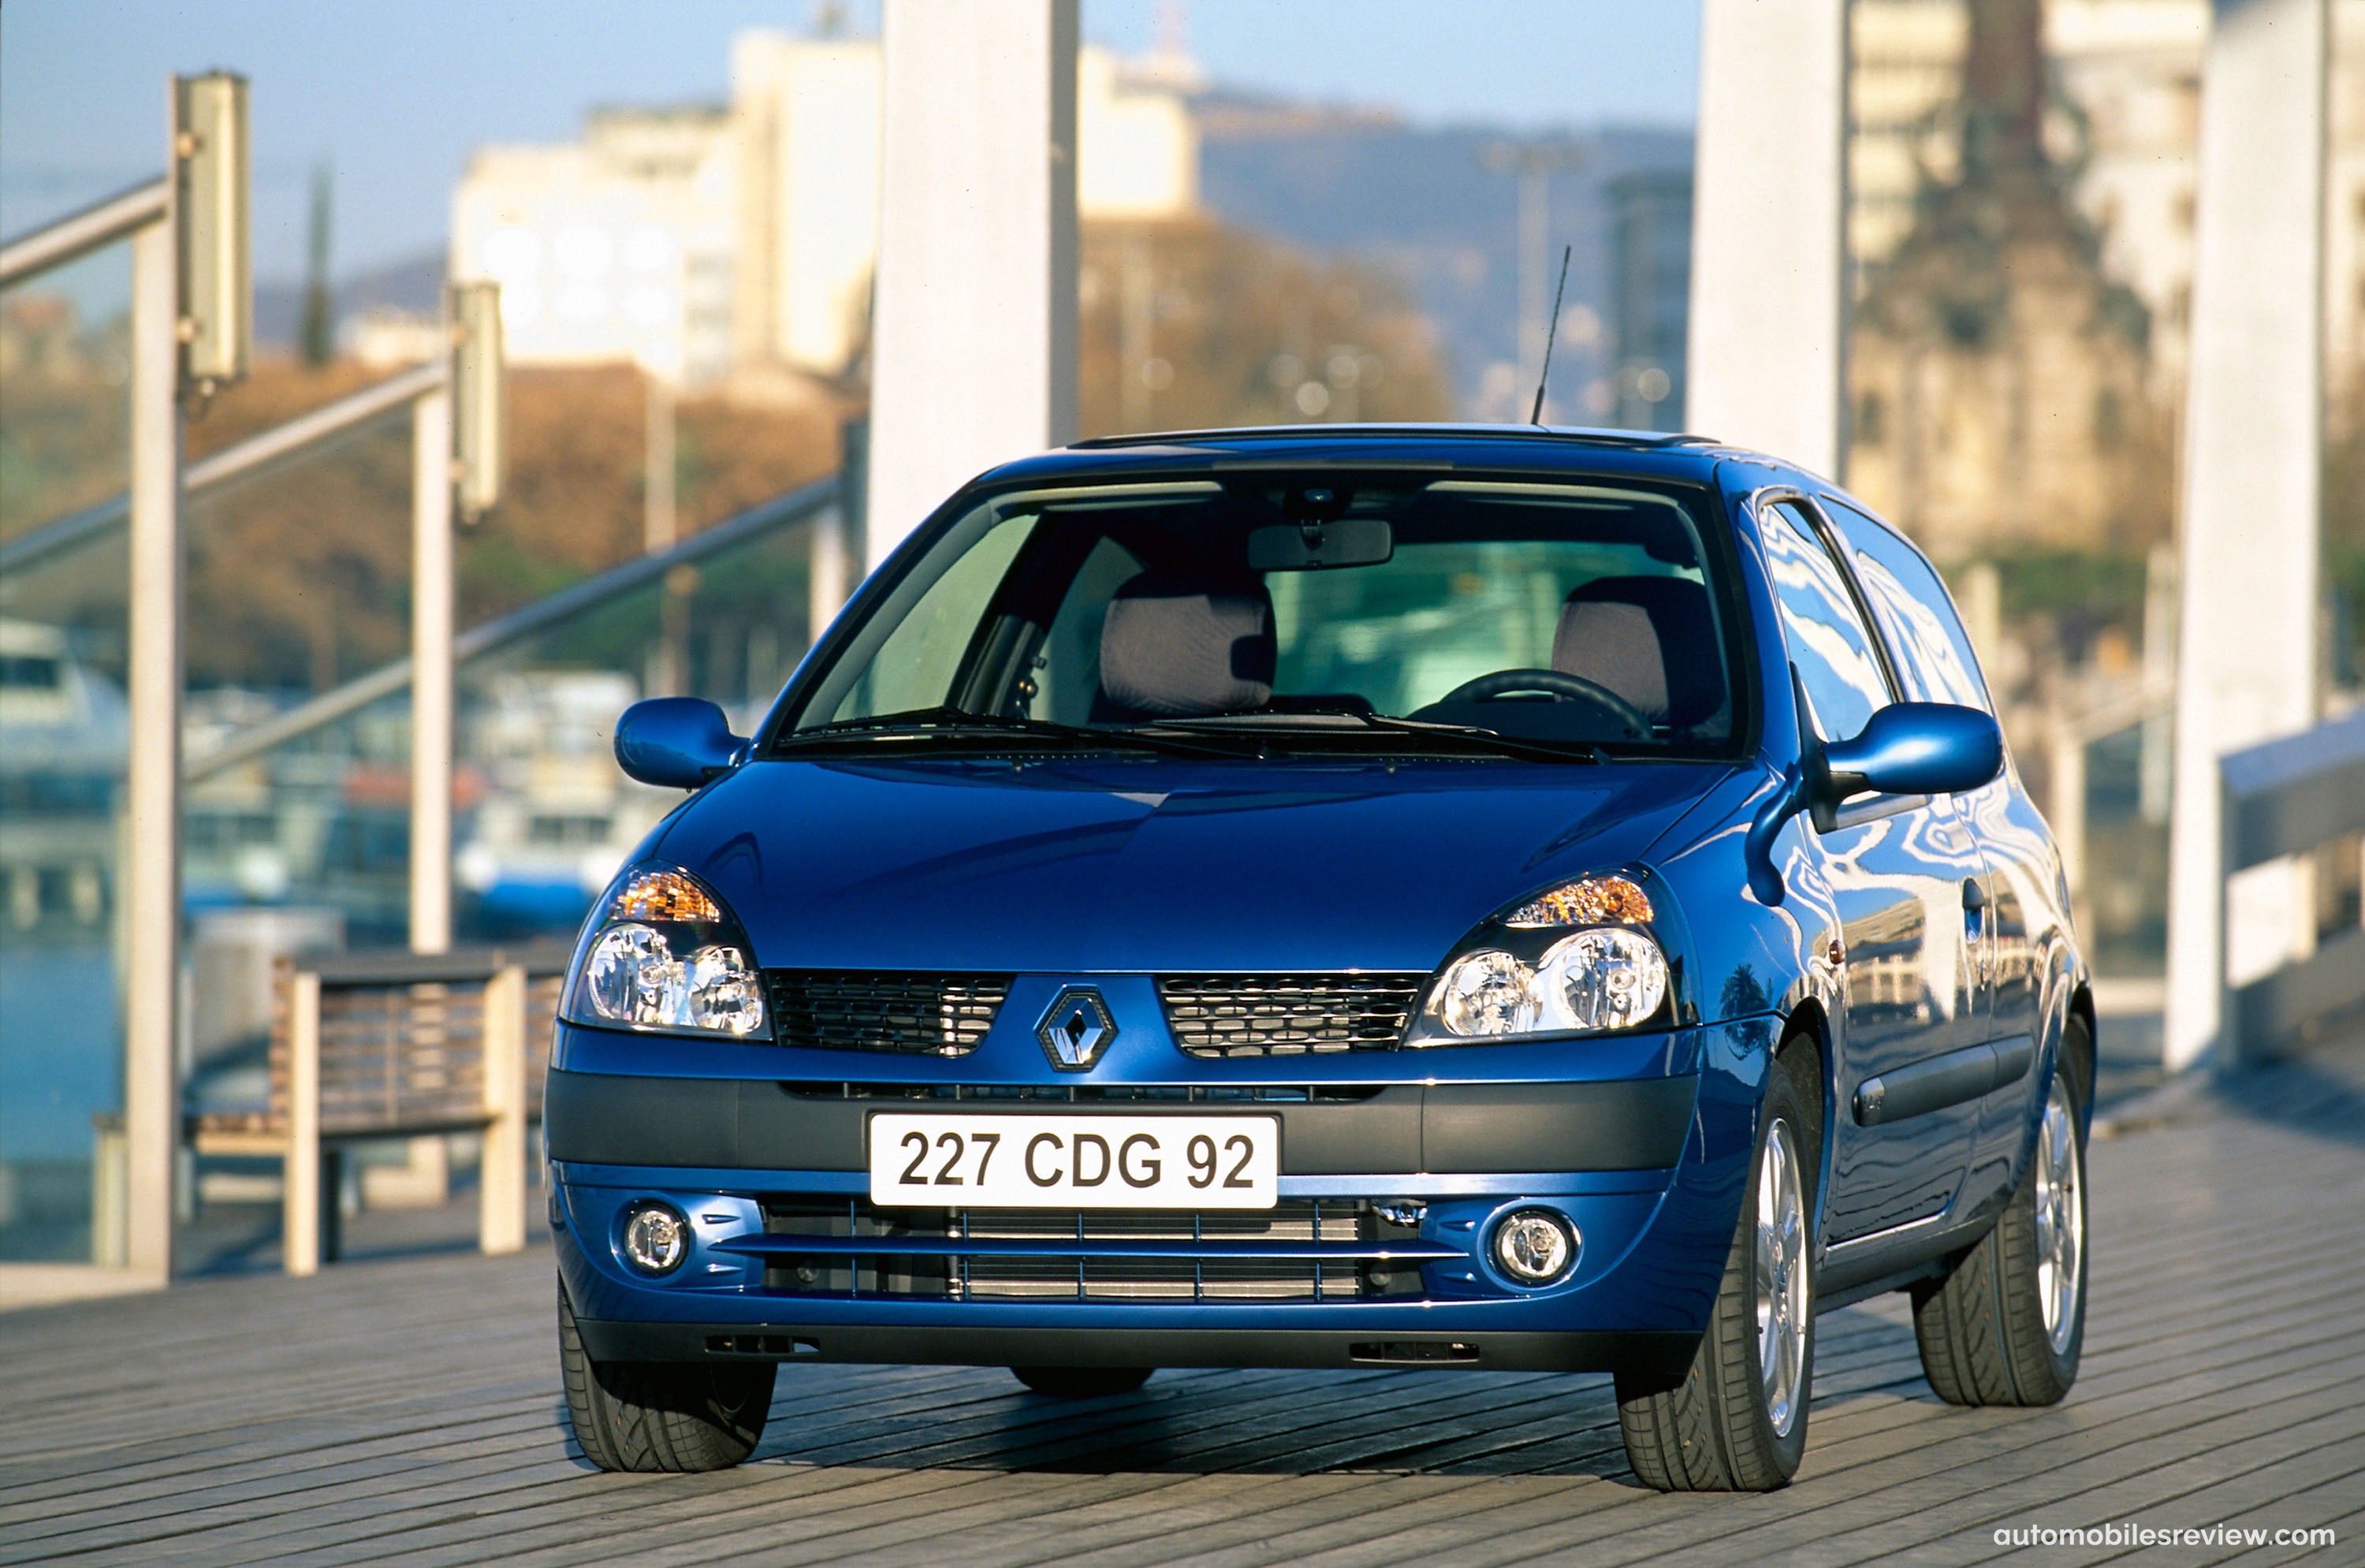 Renault Clio 30 years